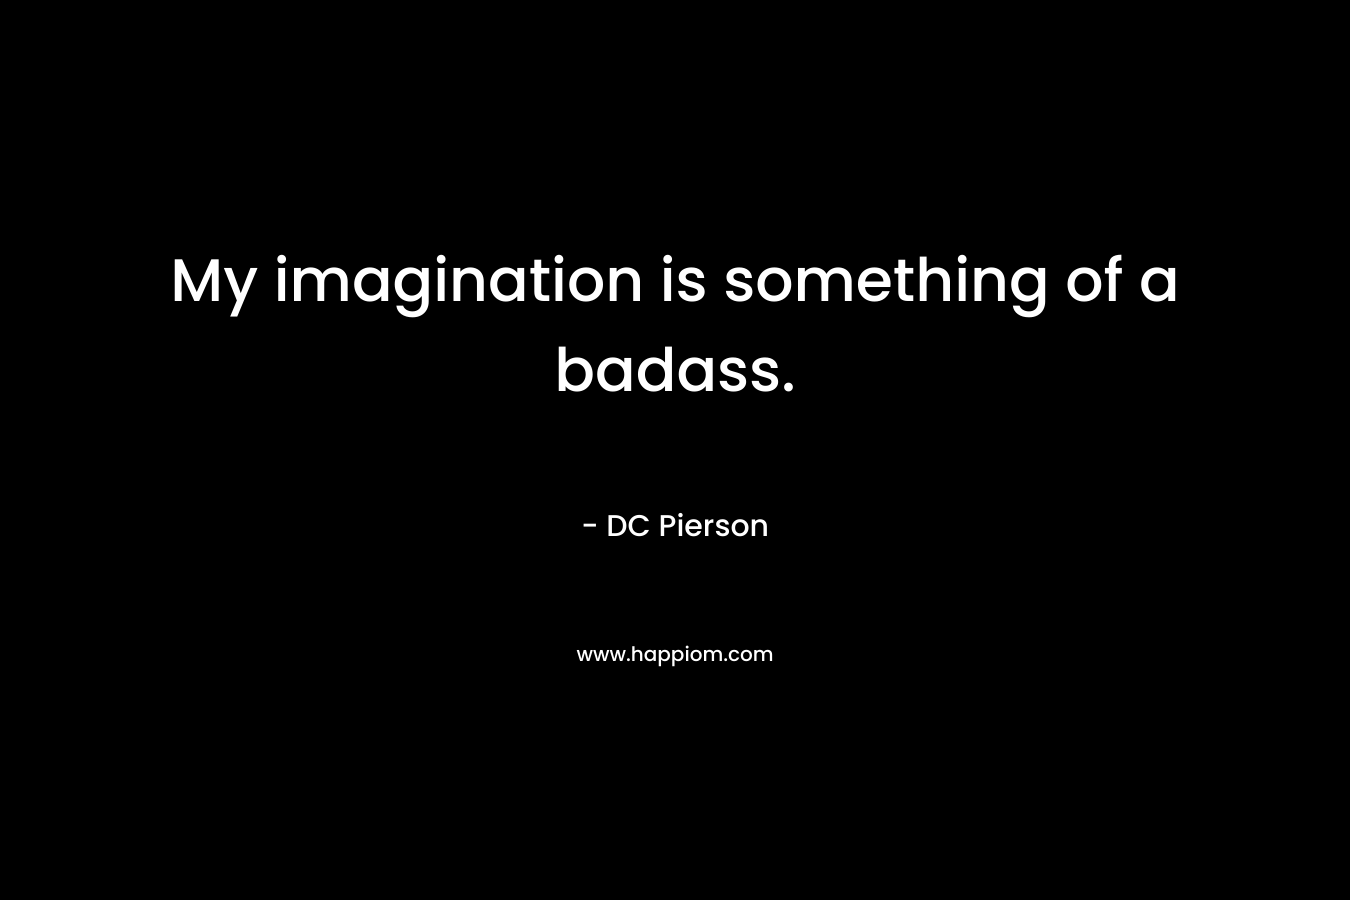 My imagination is something of a badass.